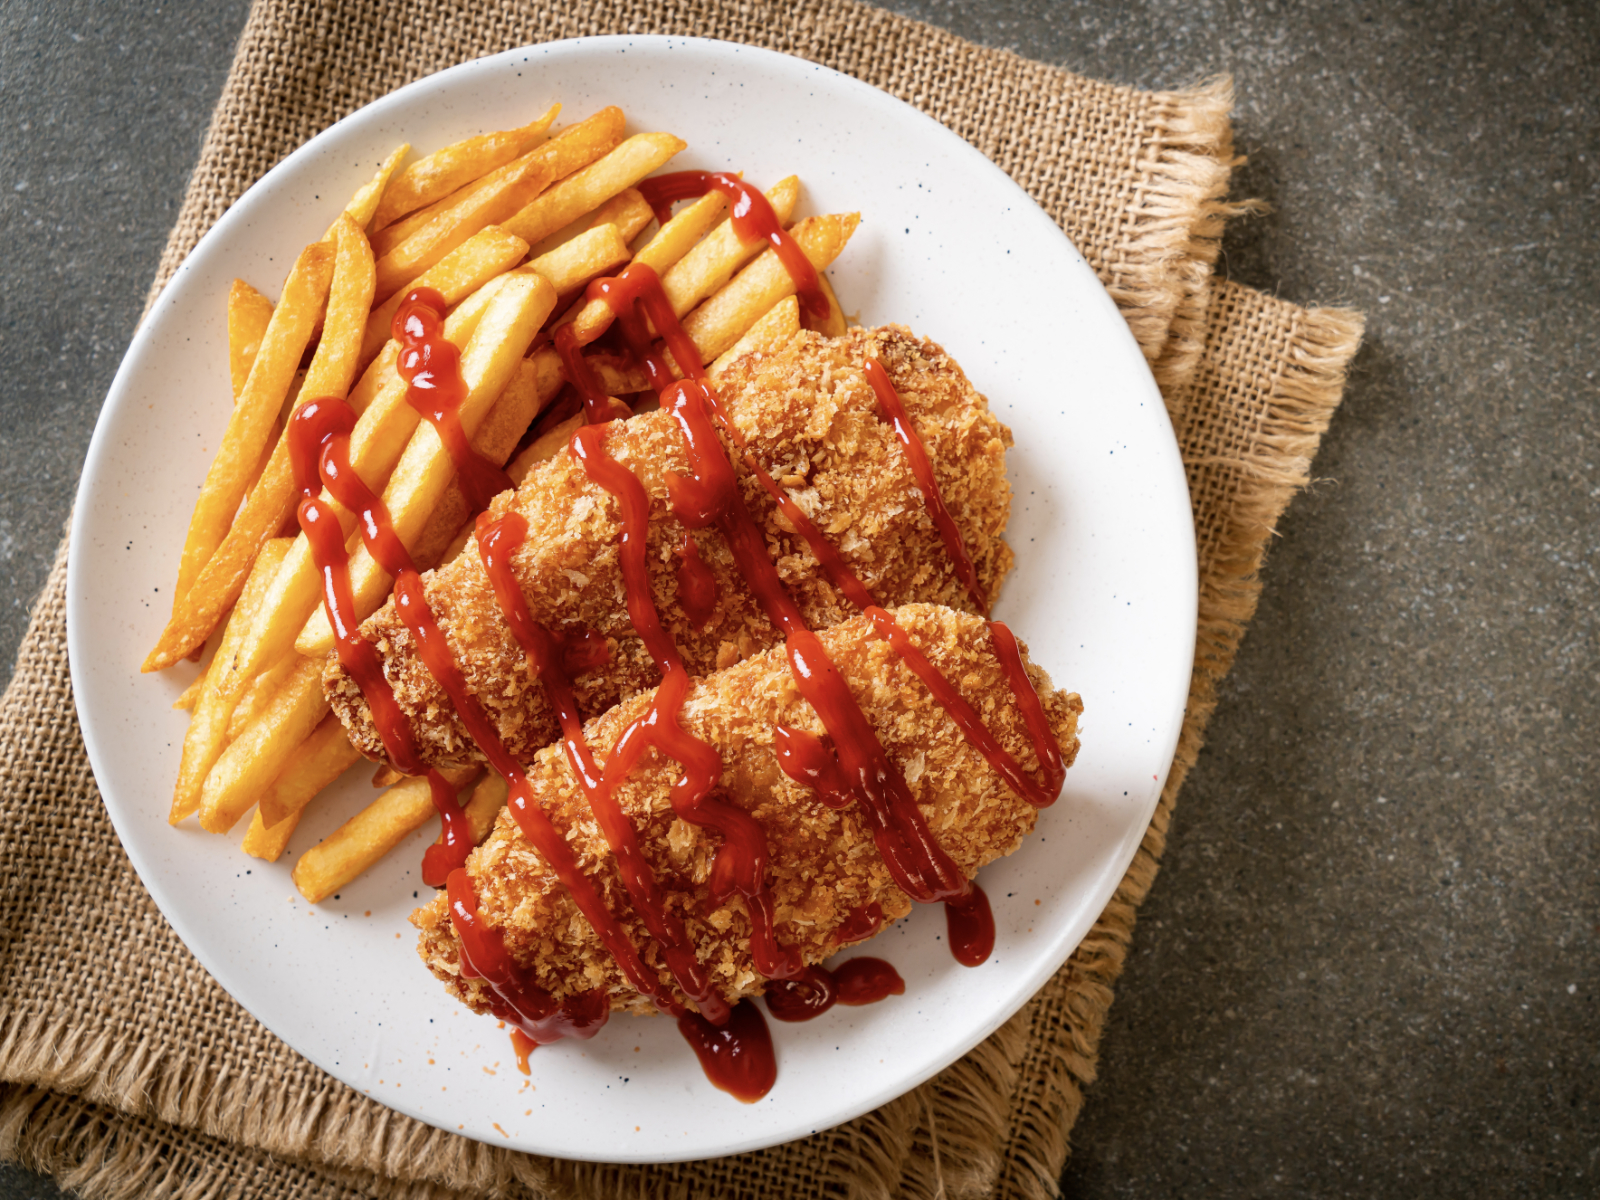 ketchup drizzled on fried chicken and french fries